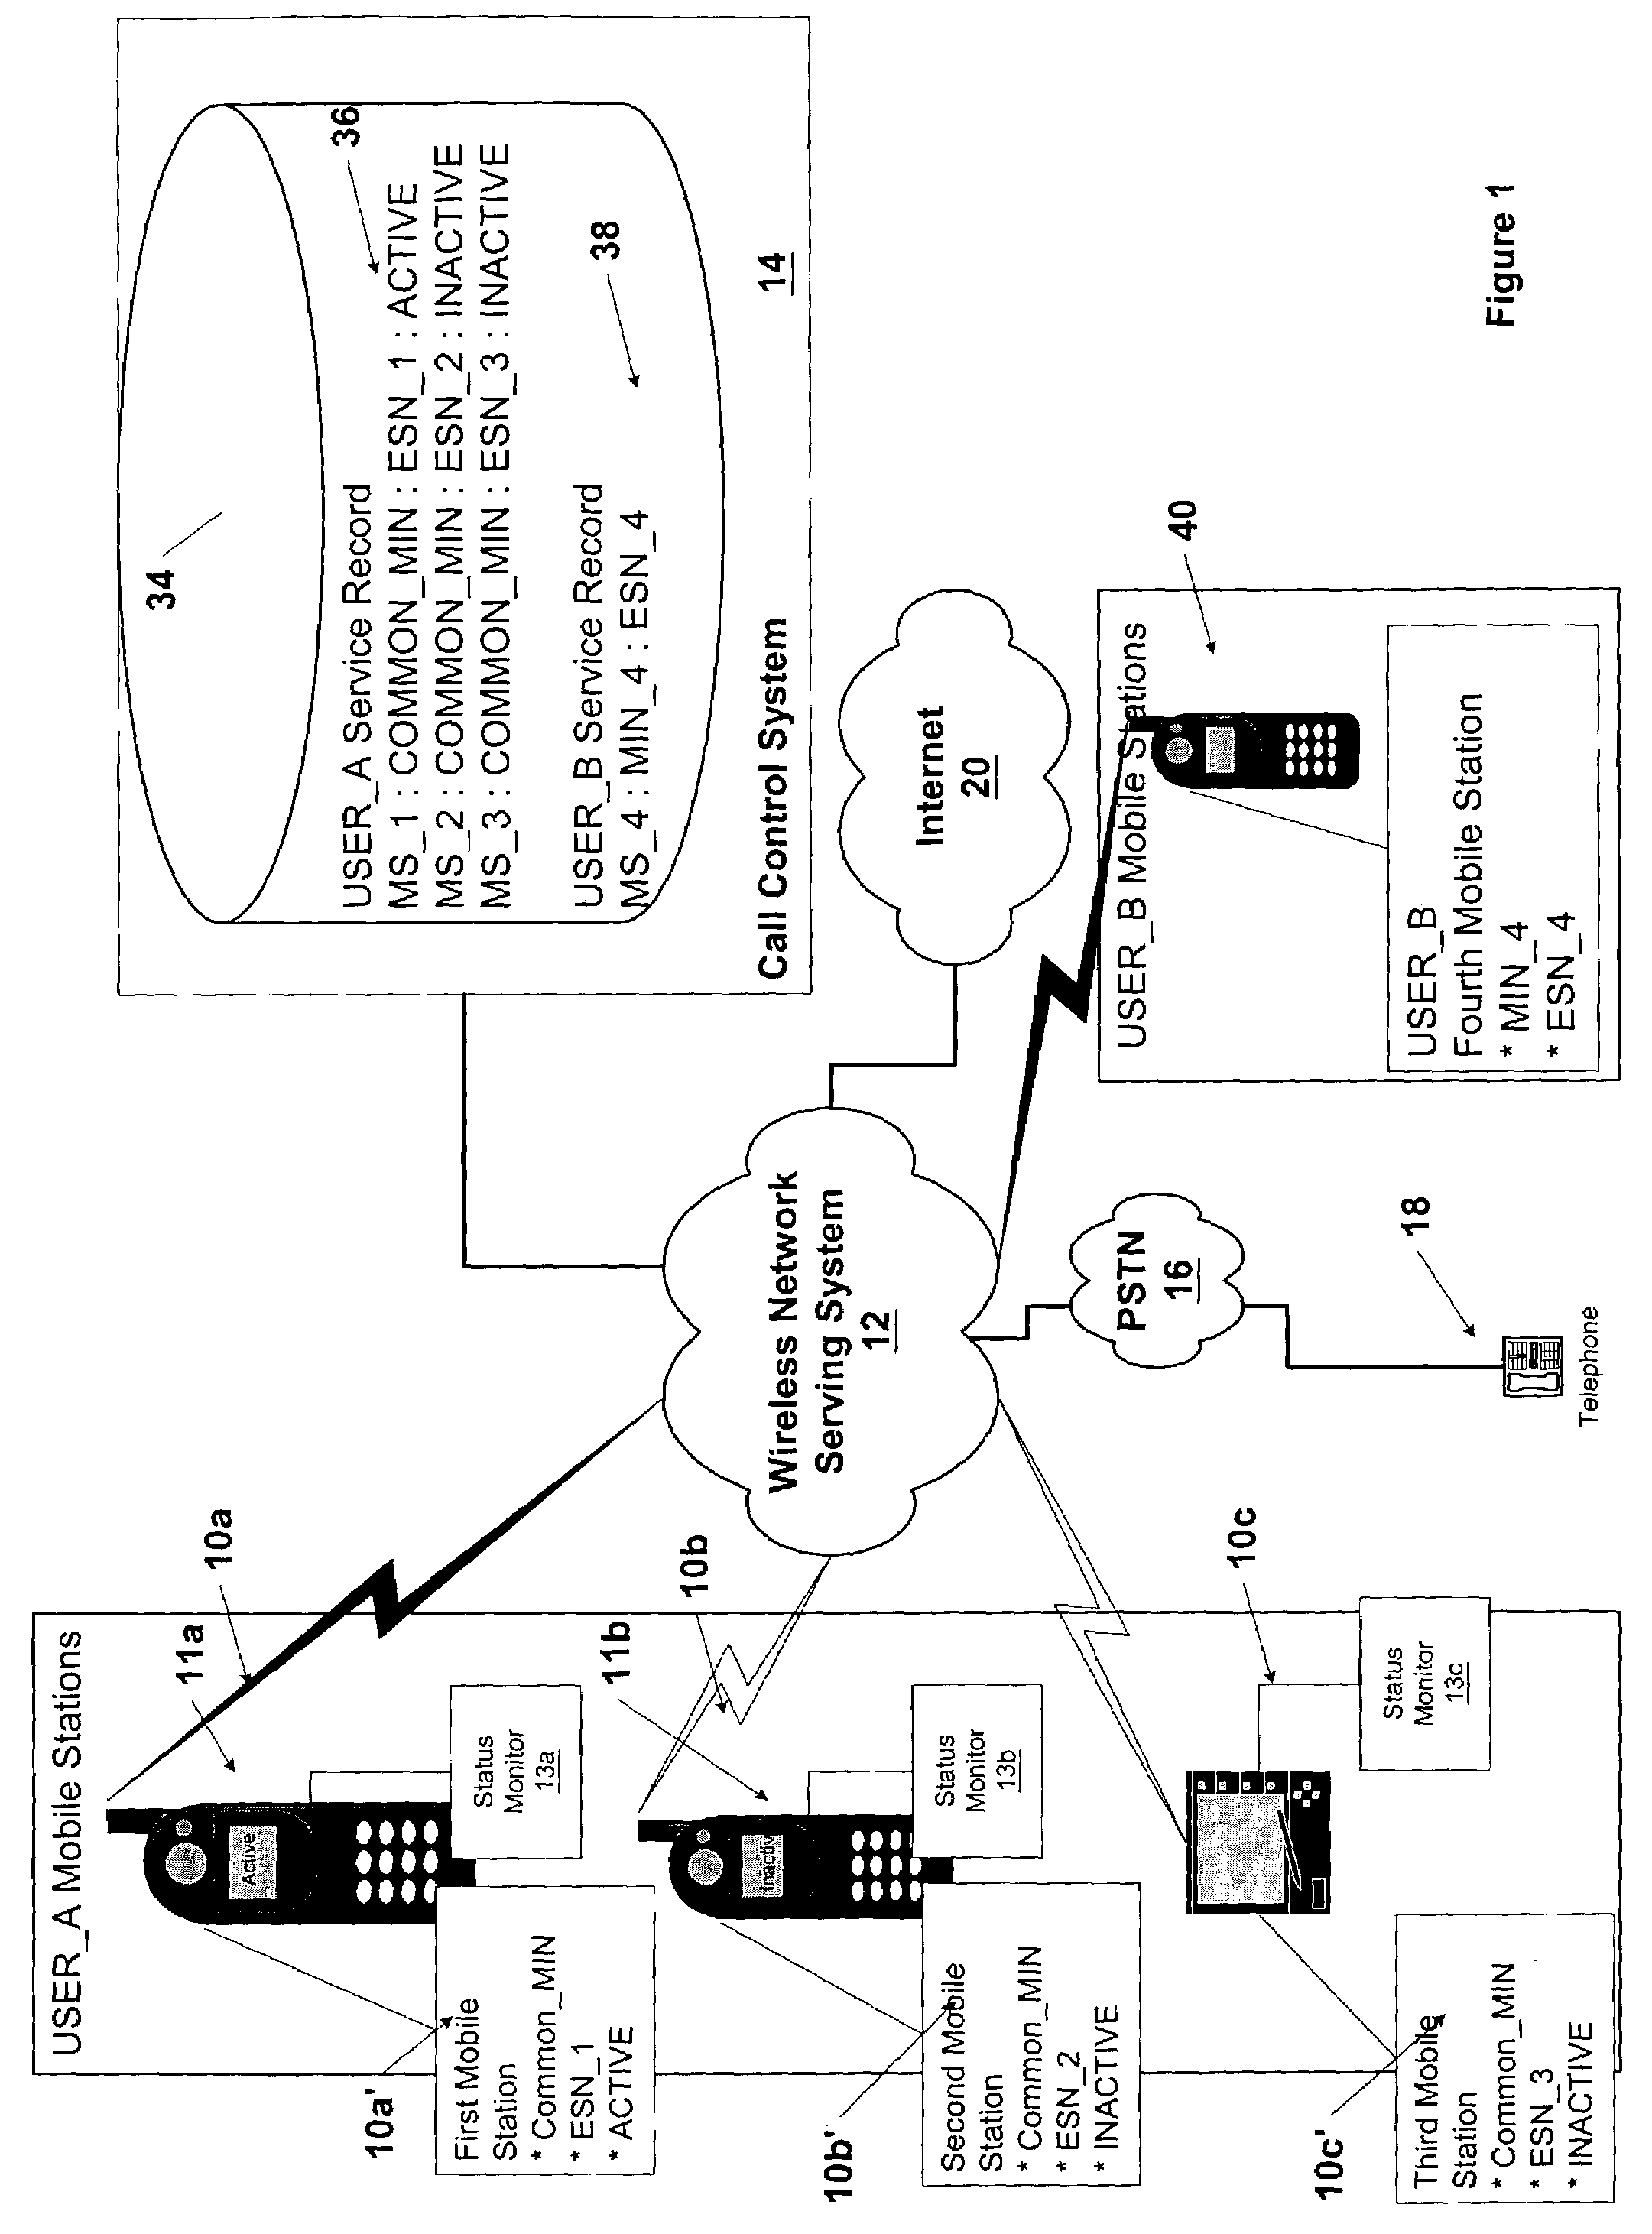 Method and system for controlling service to multiple mobile stations having a common subscriber identifier